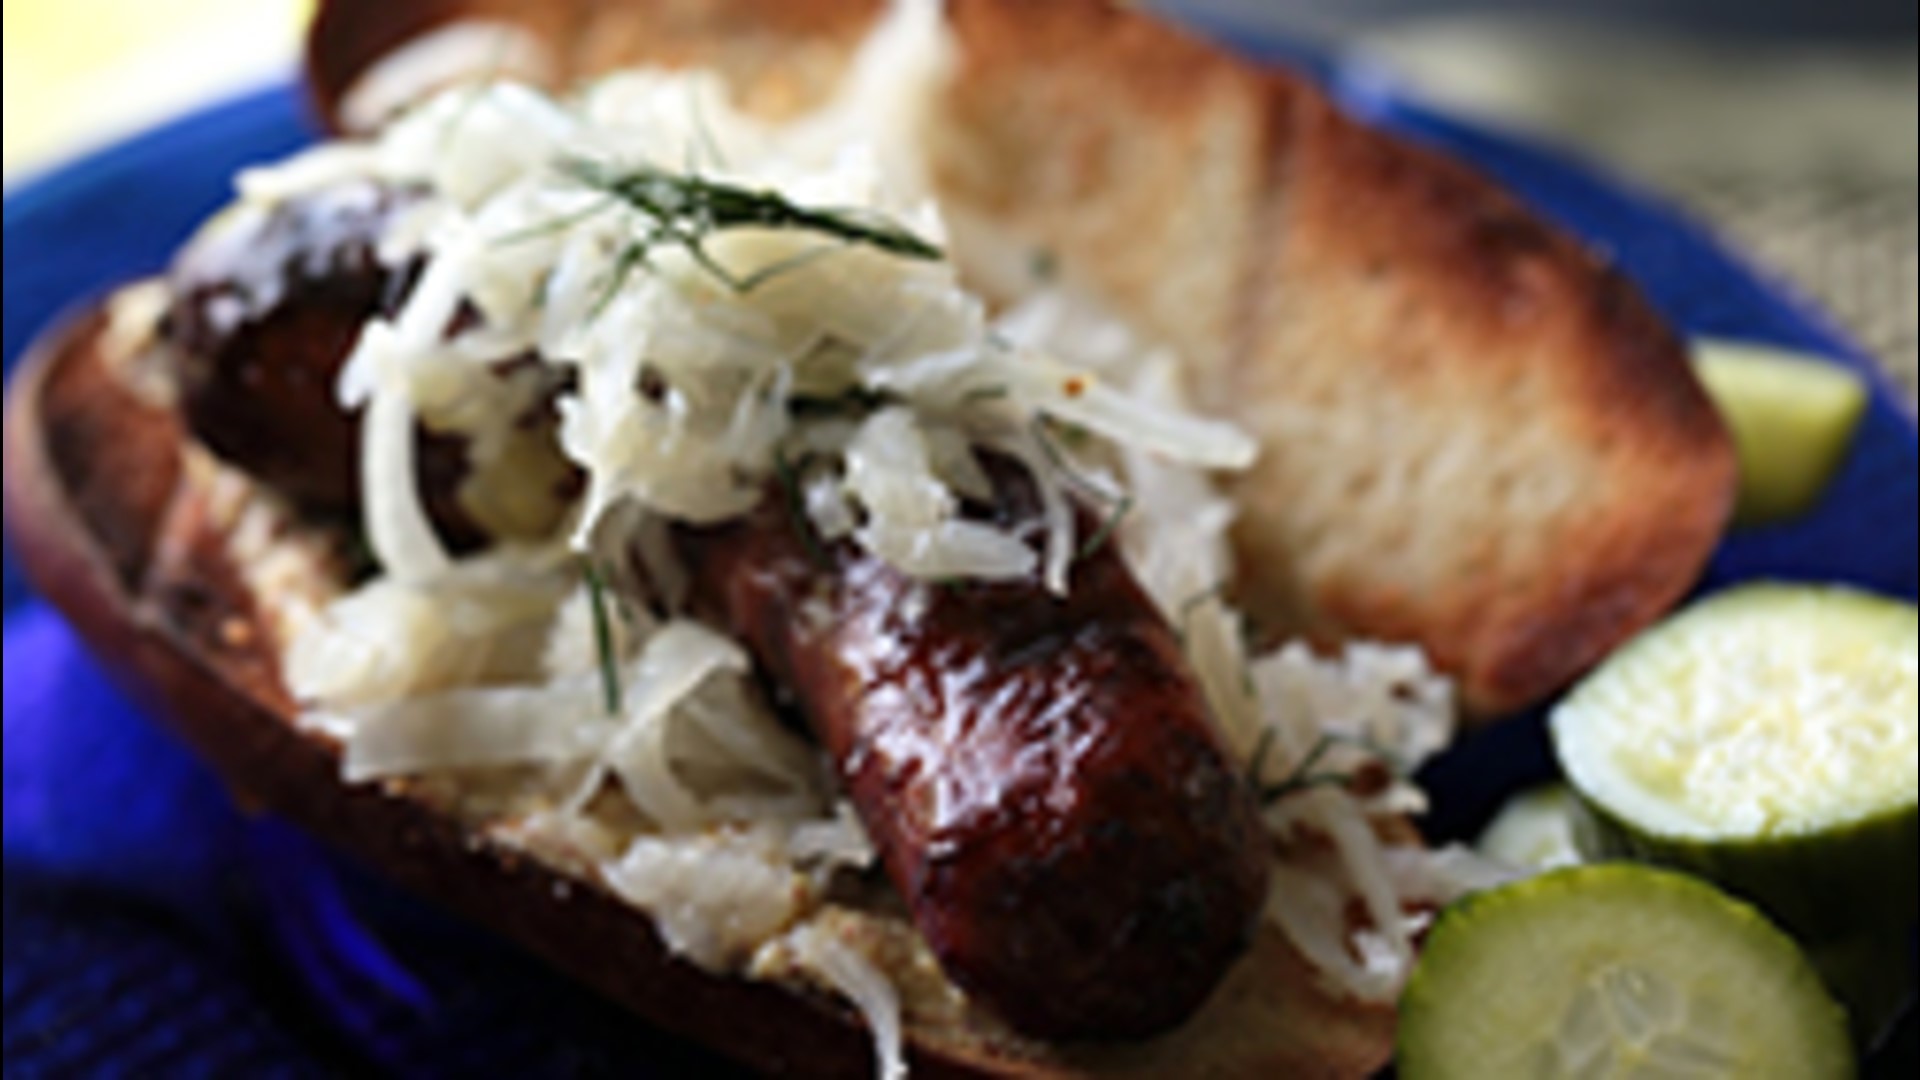 These aren't your average brats! Beer and bratwurst were made for each other, and after you try this recipe you will see why.